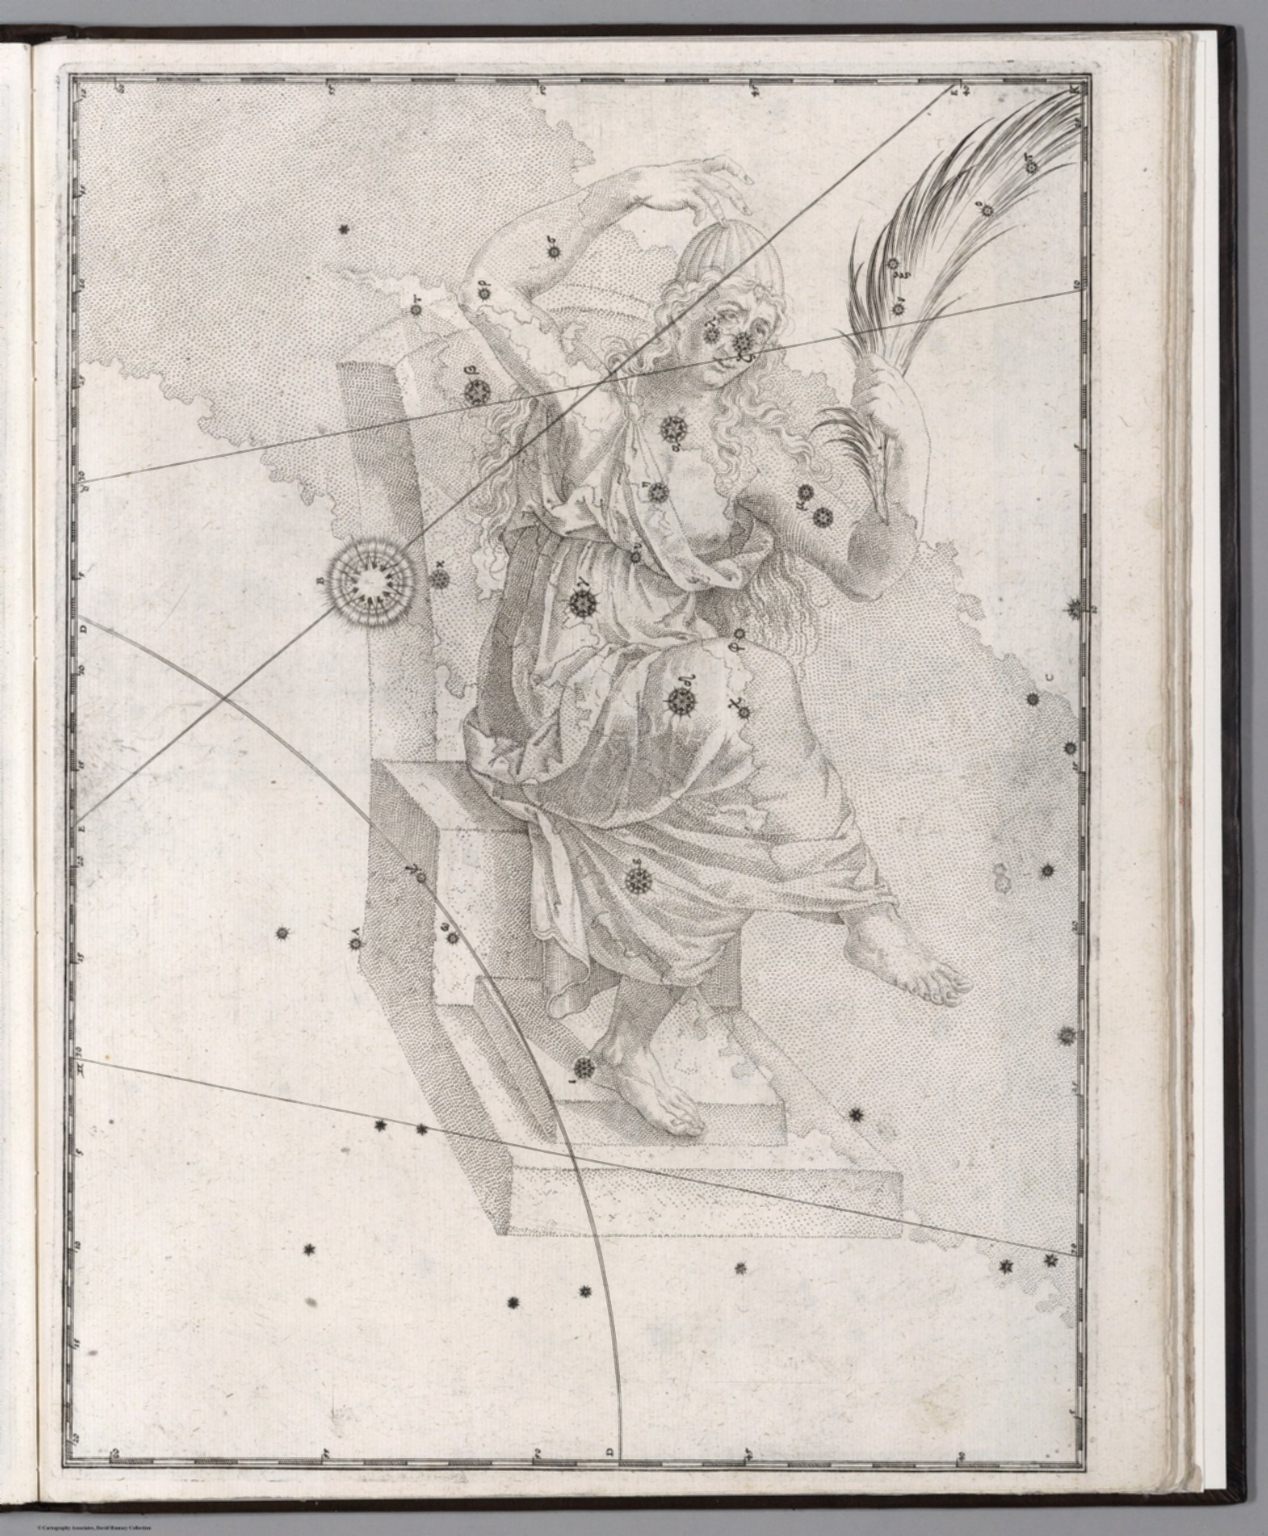 The Exquisite Drawings from the First Map of the Entire Sky - Atlas Obscura